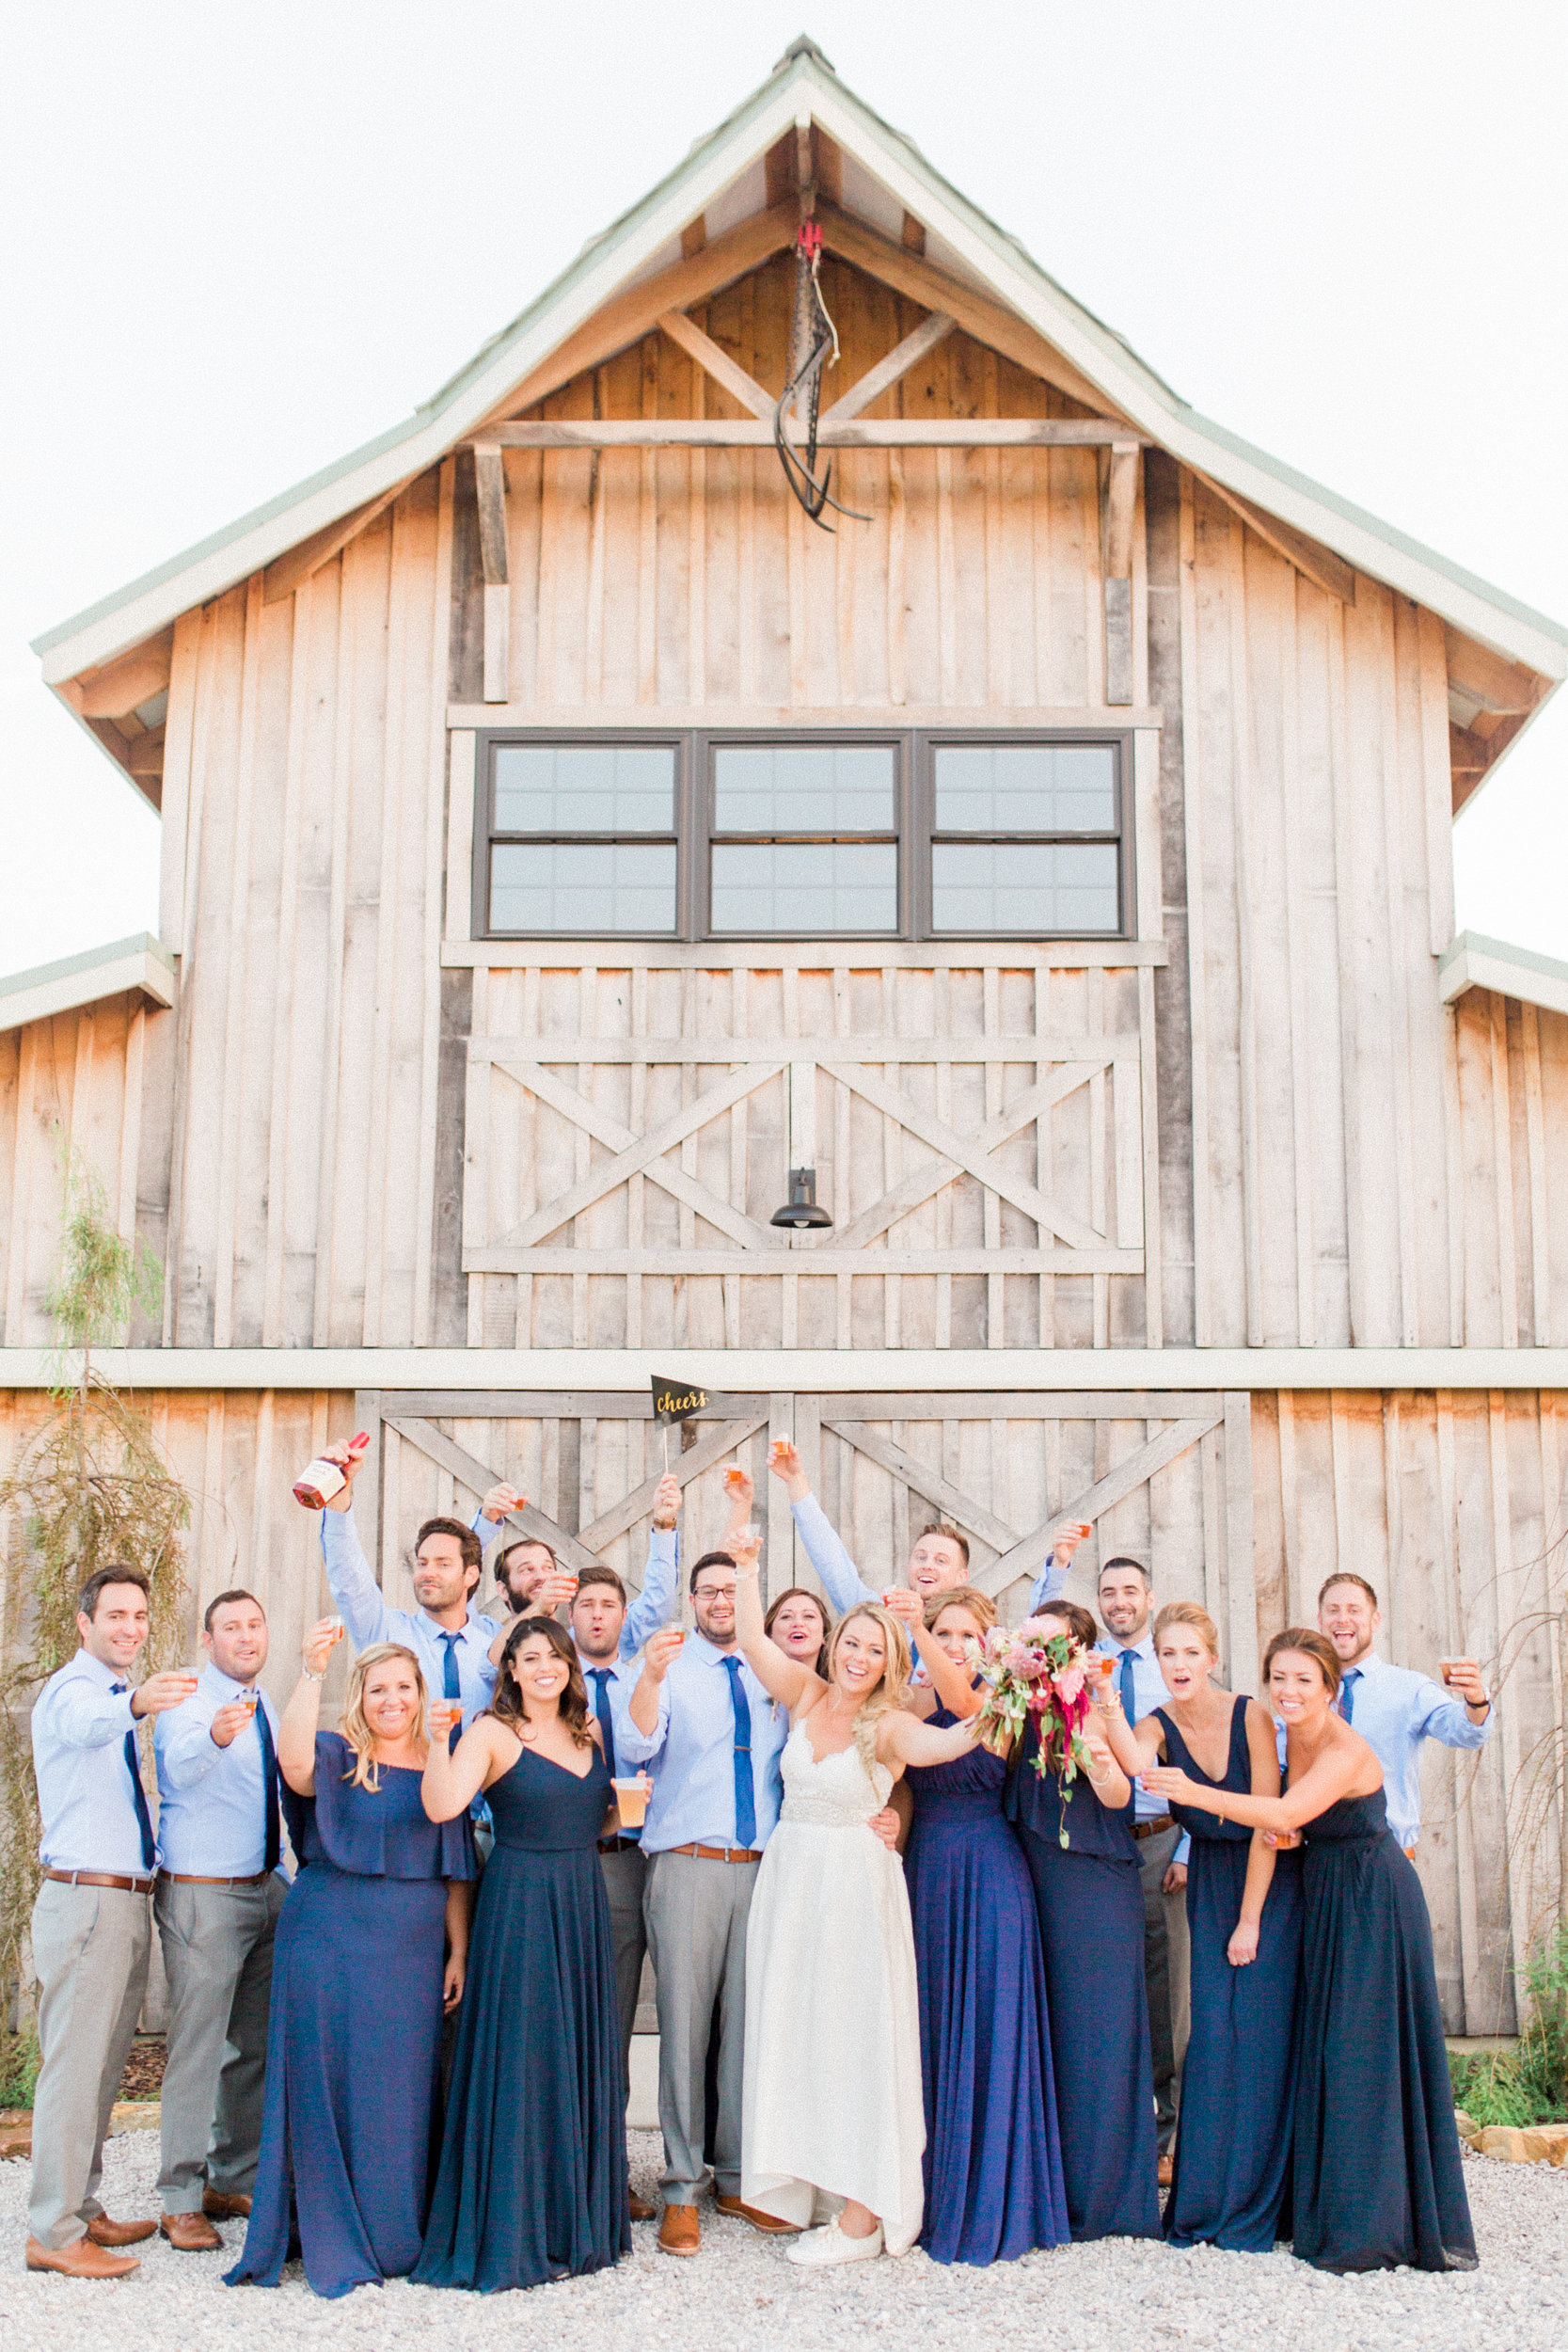 Wedding party outside of barn. Photographed by Morgan Williams Photography.